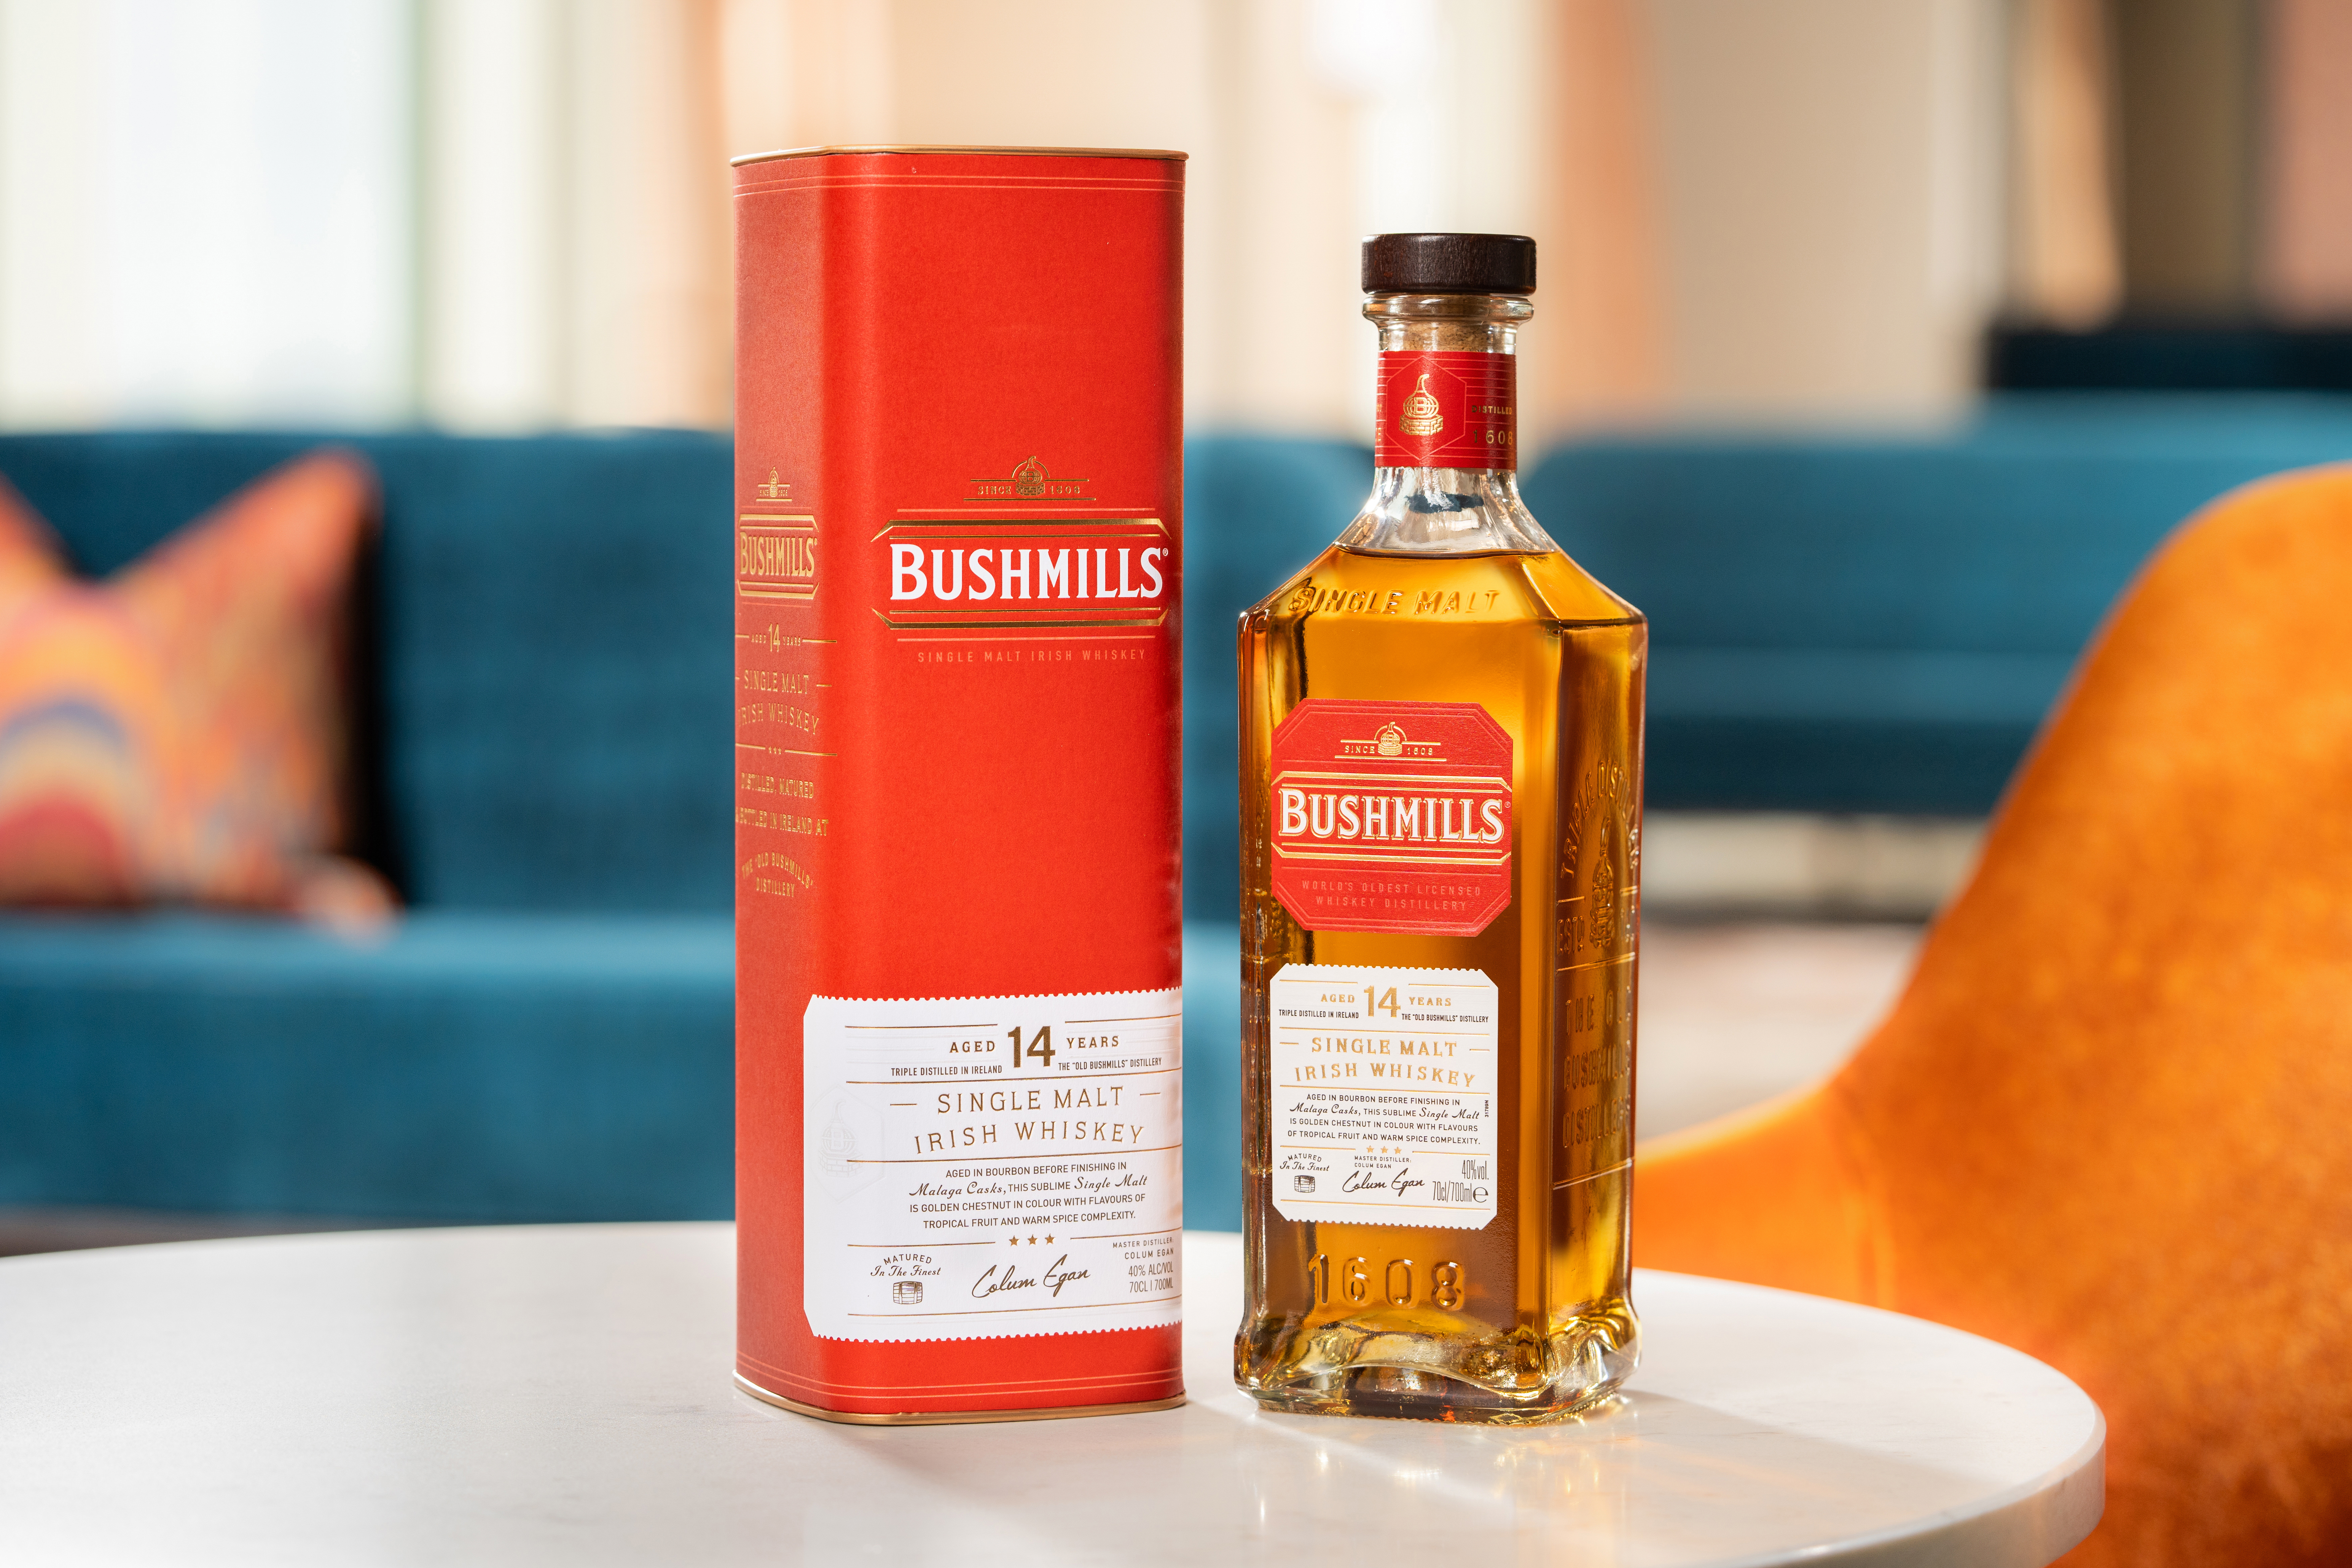 Bushmills 14 Year Old Lifestyle Bottle and Pack